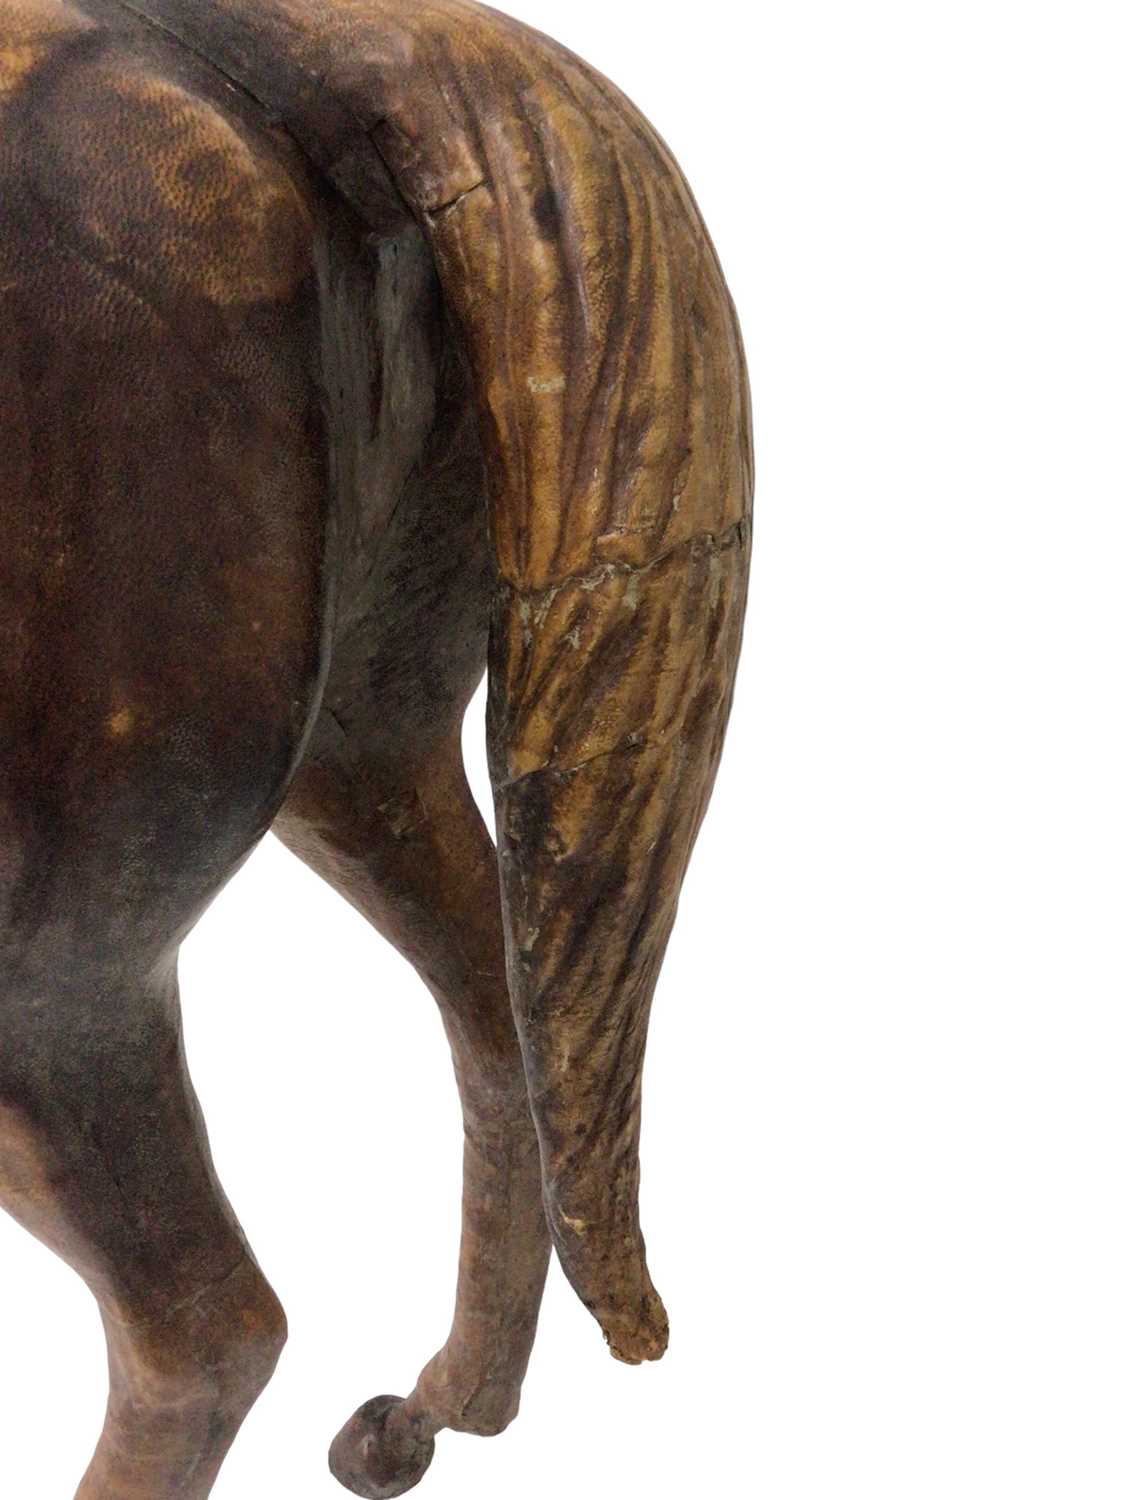 Large leather covered wooden horse in the style of Liberty - Image 5 of 10